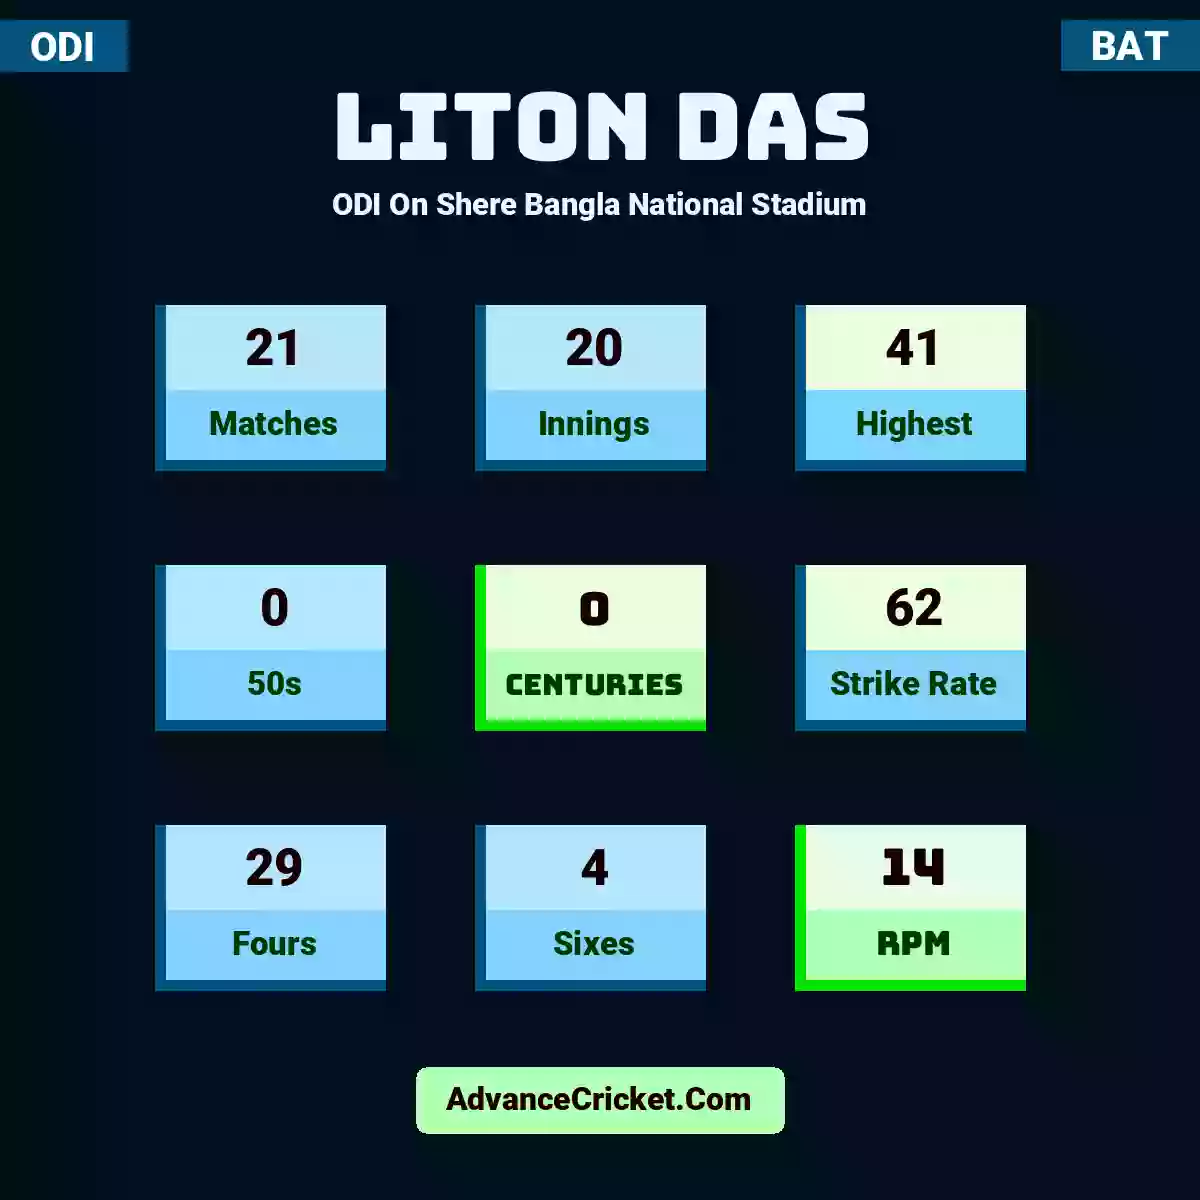 Liton Das ODI  On Shere Bangla National Stadium, Liton Das played 21 matches, scored 41 runs as highest, 0 half-centuries, and 0 centuries, with a strike rate of 62. L.Das hit 29 fours and 4 sixes, with an RPM of 14.